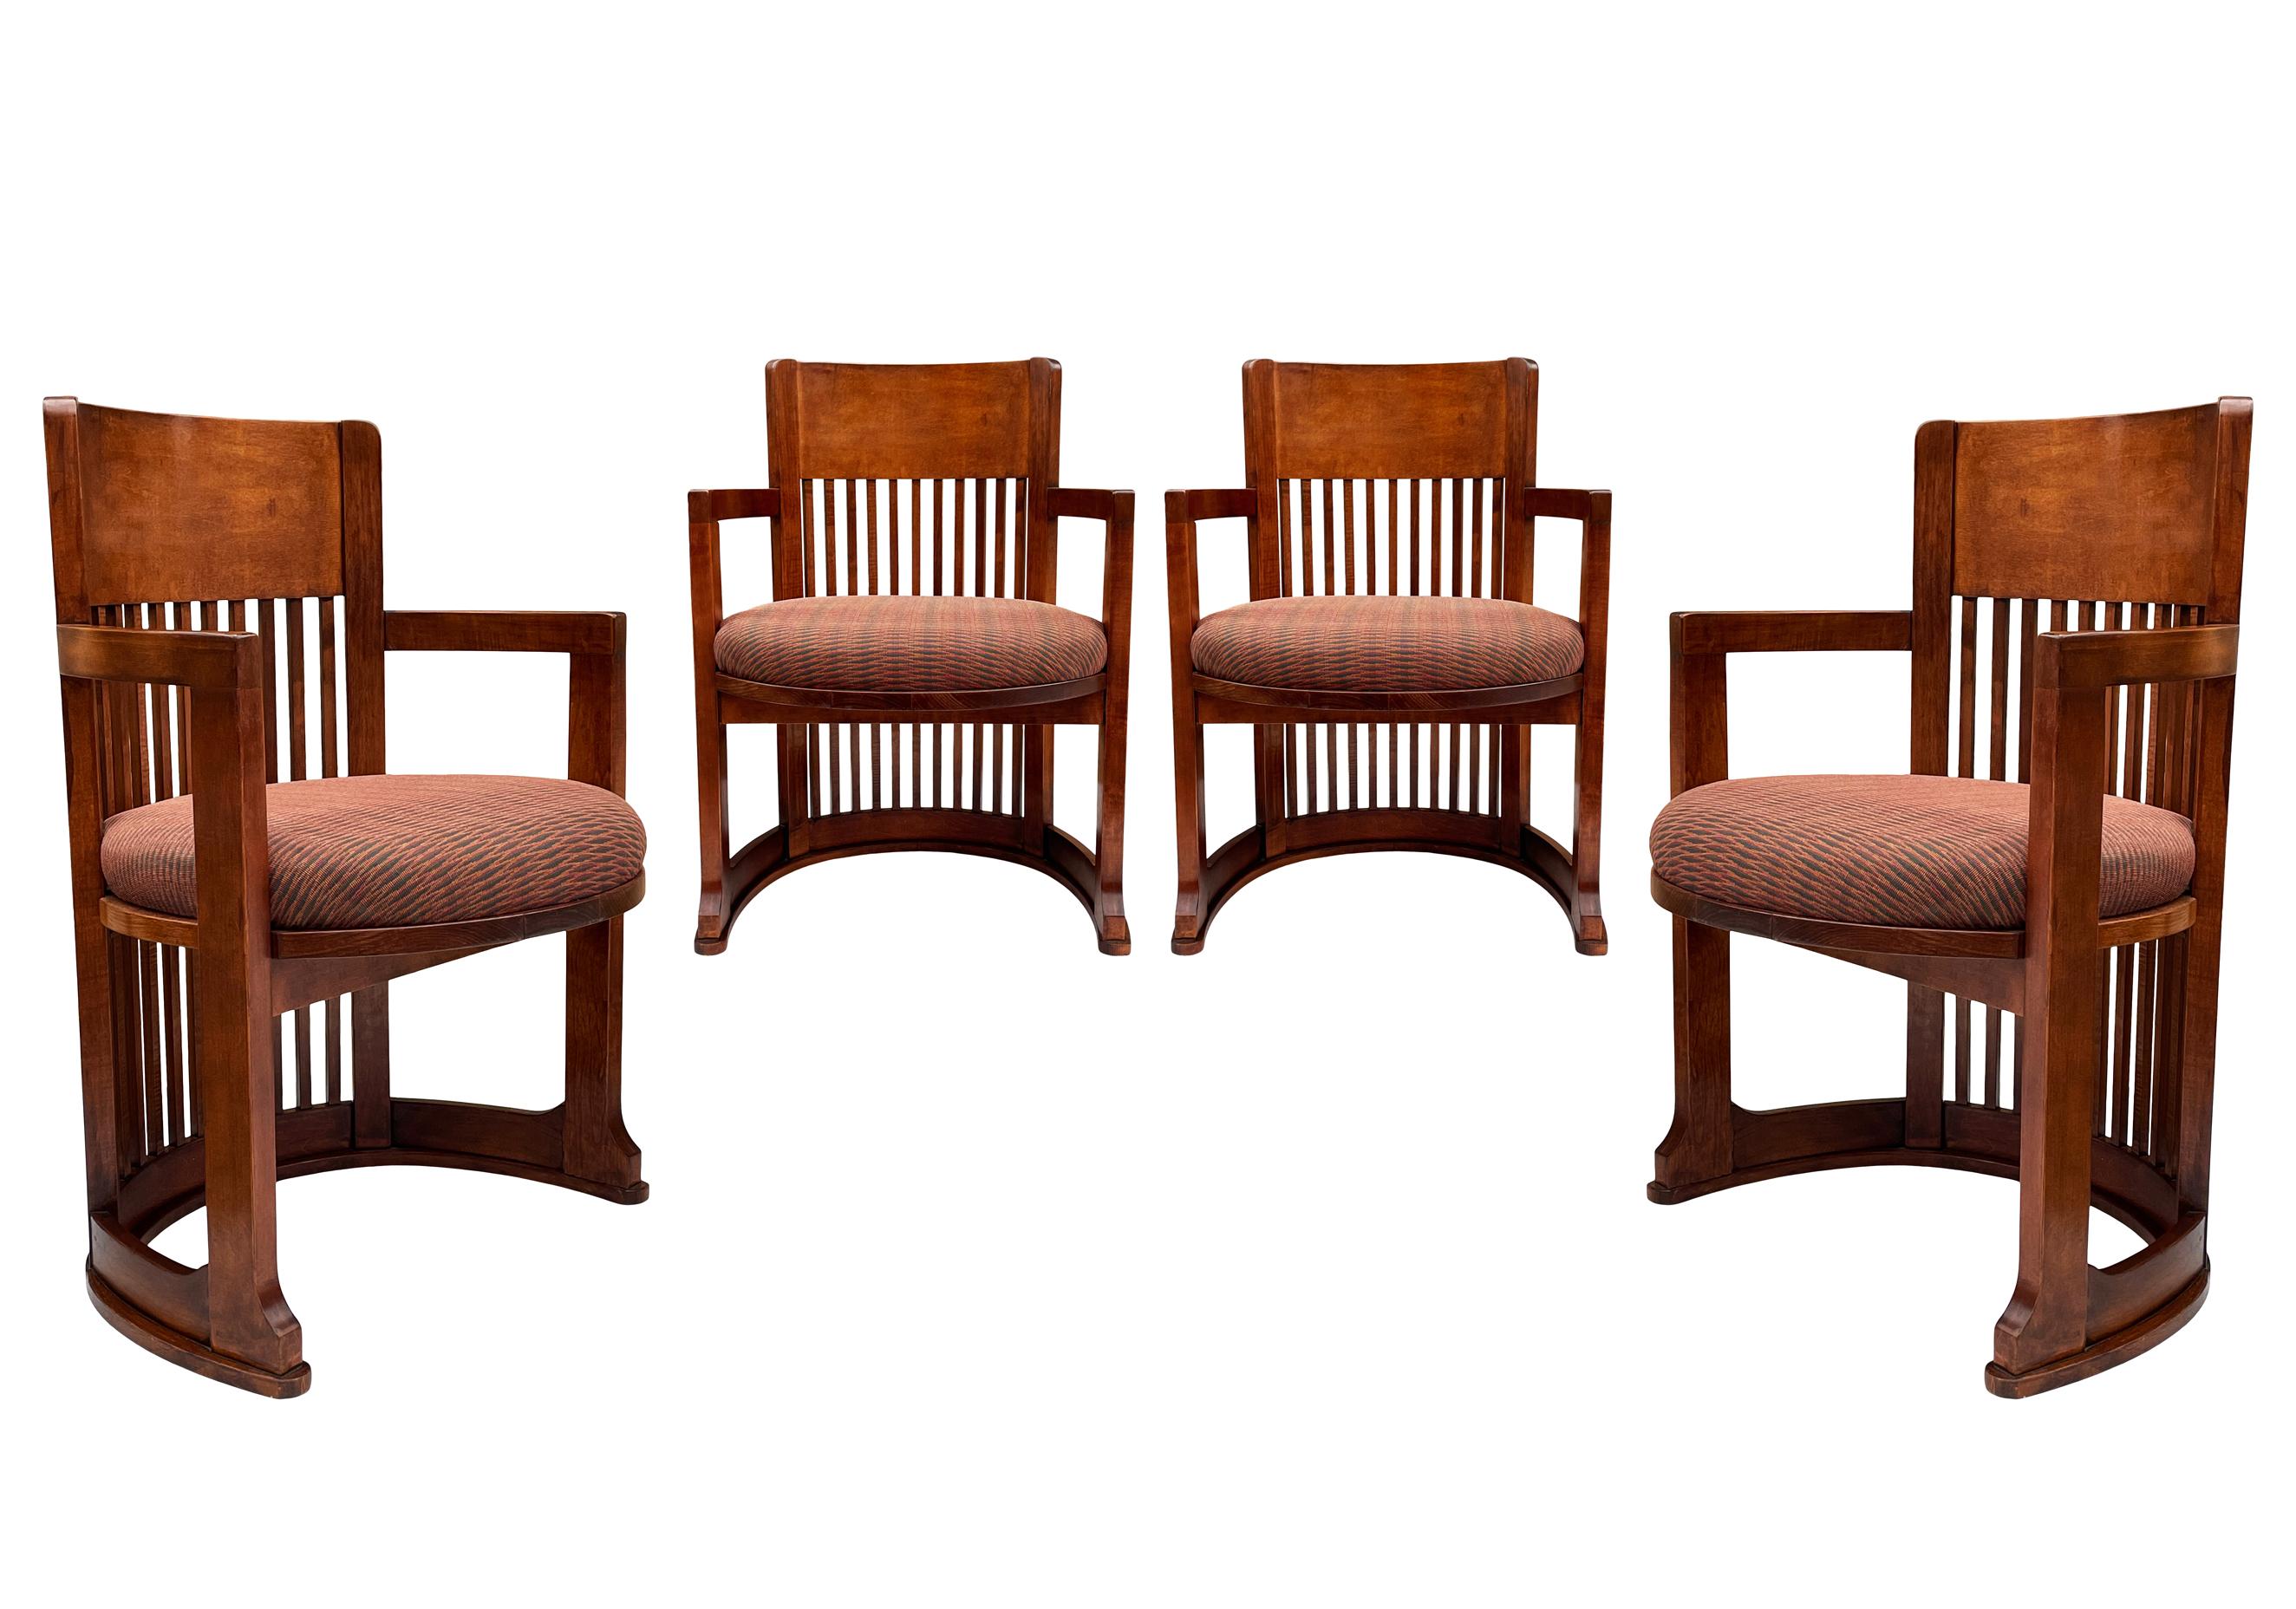 Late 20th Century Mid-Century Modern Spindle Barrel Back Dining Chairs after Frank Lloyd Wright